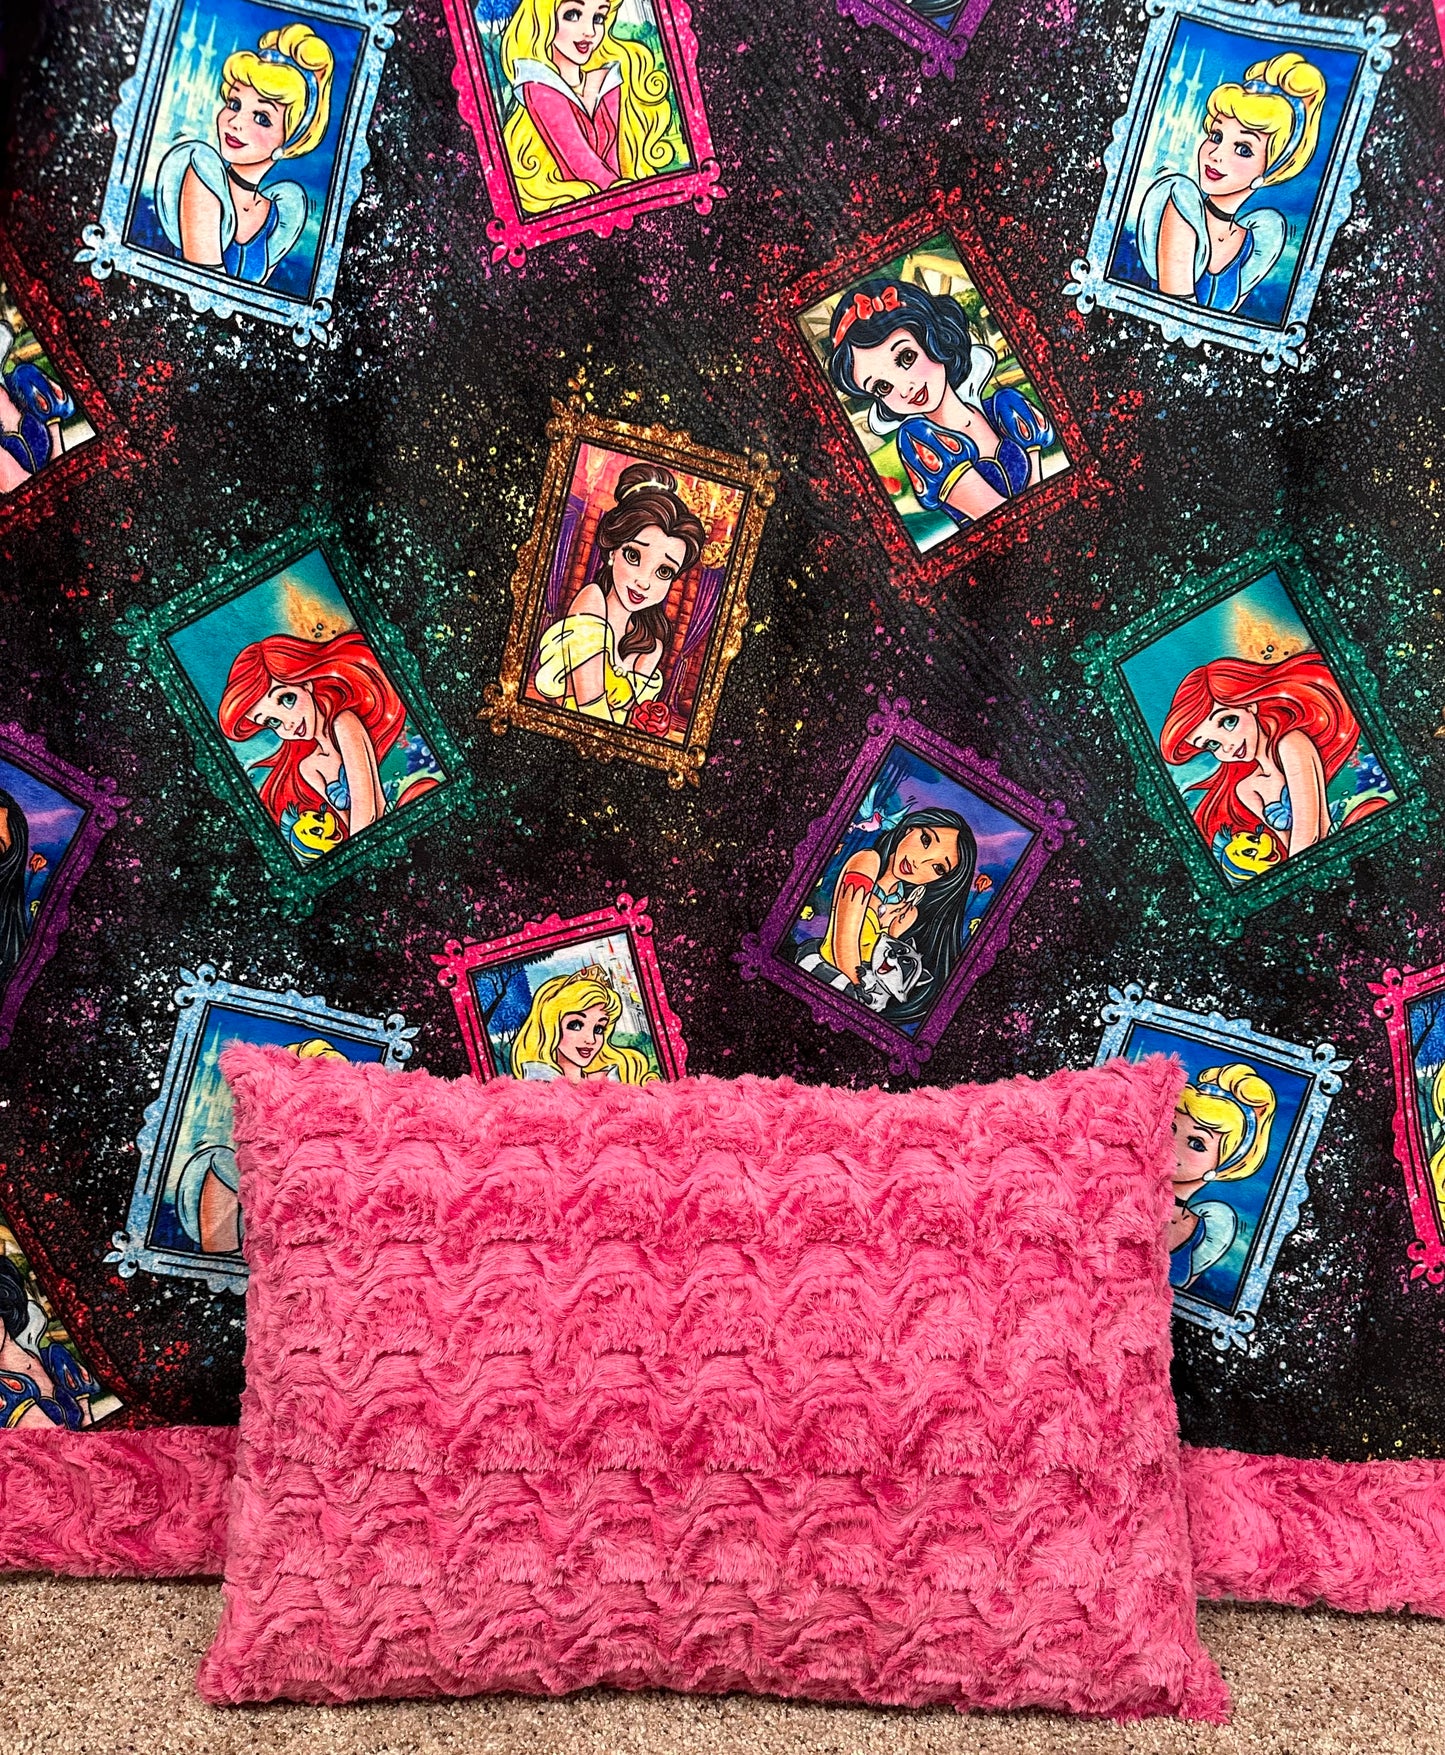 Glitter Princess on Paloma Magenta Toddler Minky Blanket 41x60 with 12x18 Pillowcase Spoonflower Quality